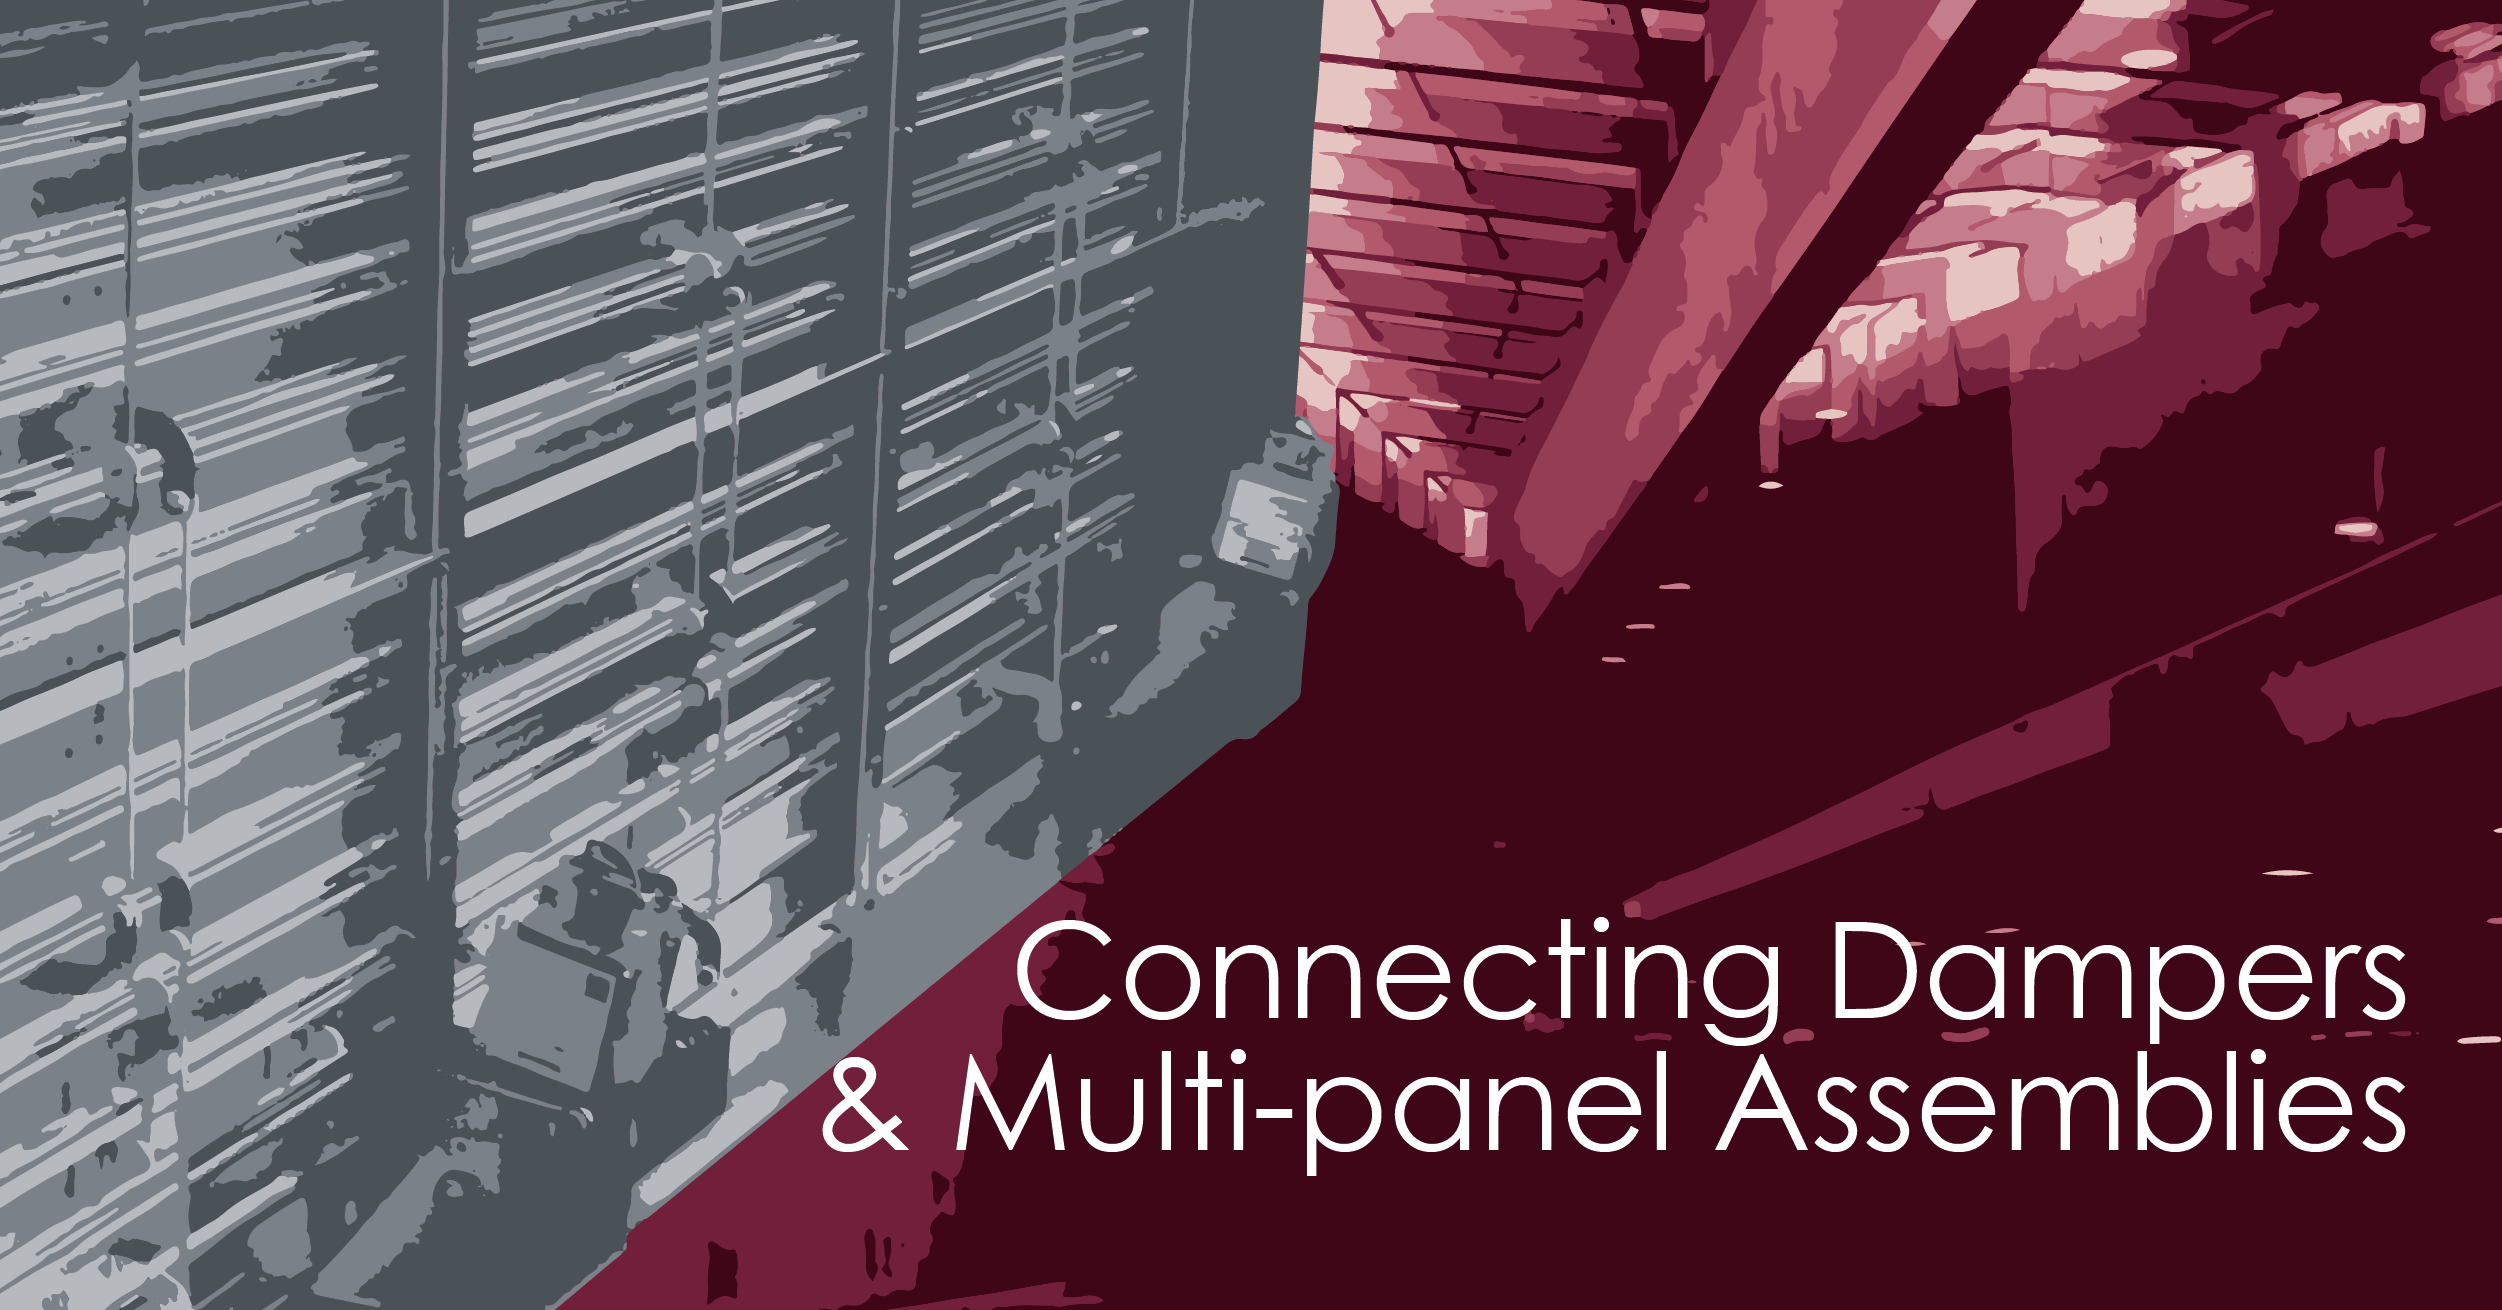 Connecting Dampers and Multi-panel Assemblies